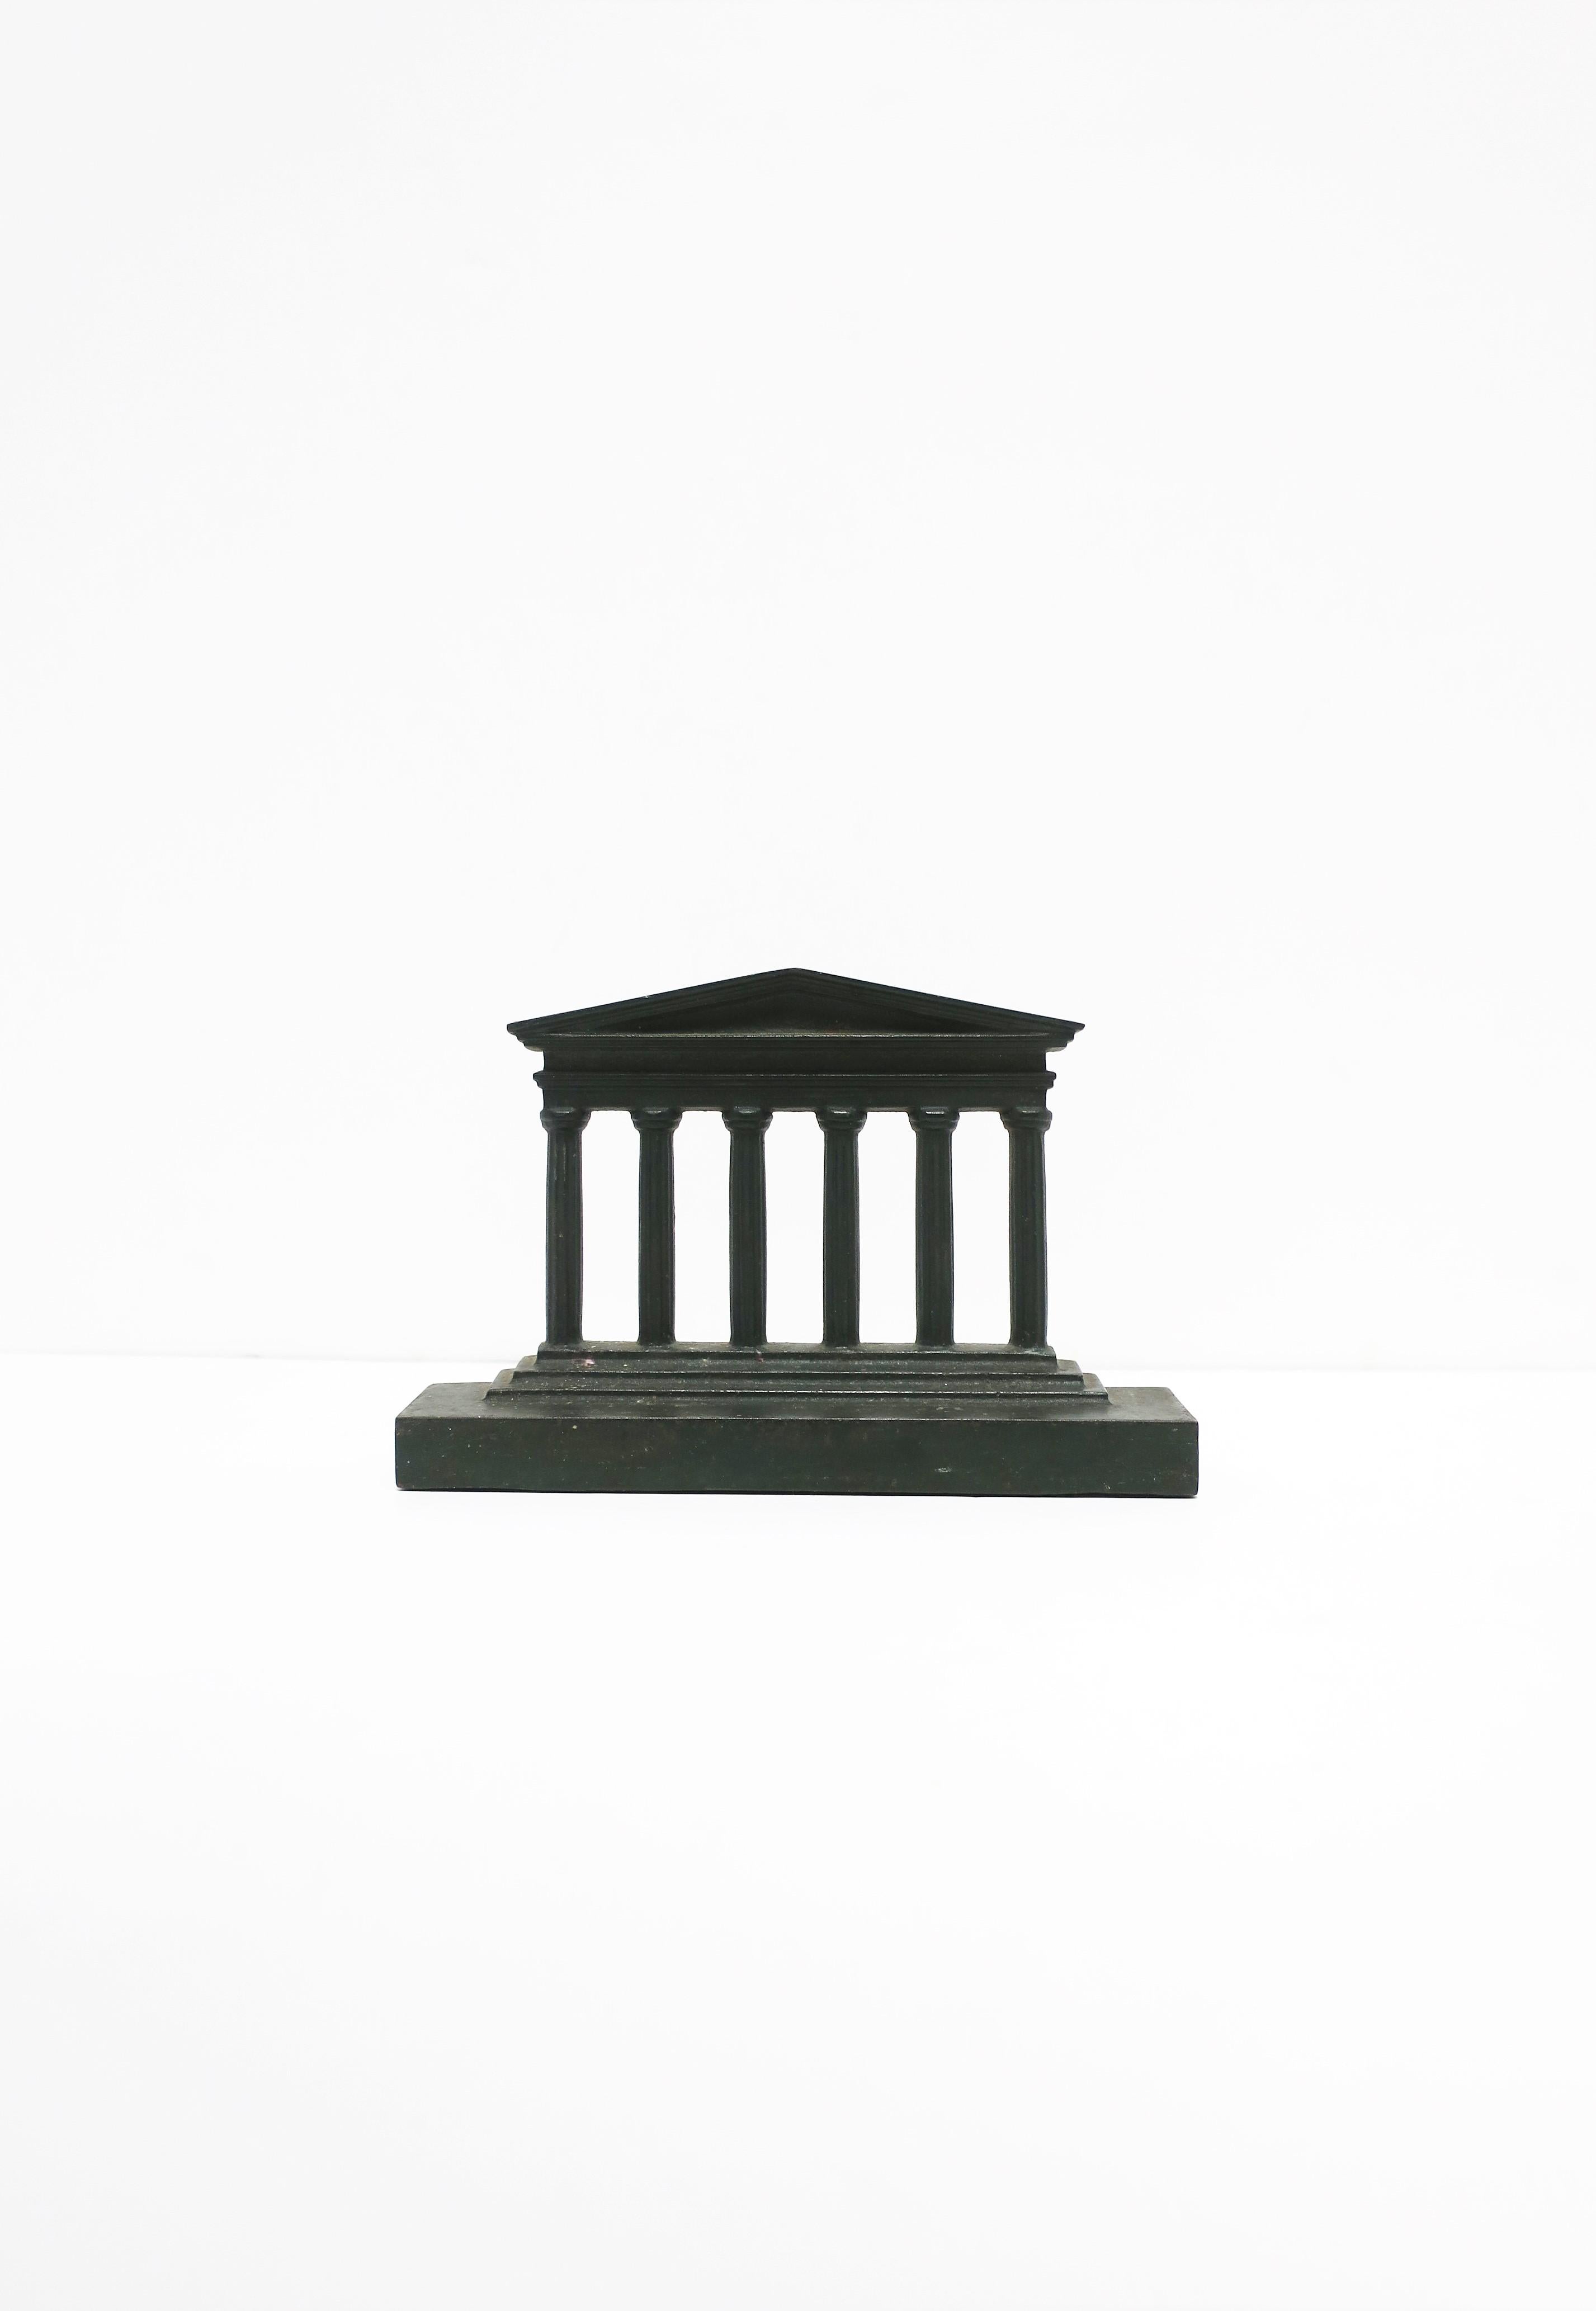 A substantial grand tour neoclassical Pantheon building facade style with column architecture bookend, circa early 20th century. Dimensions: 1.63